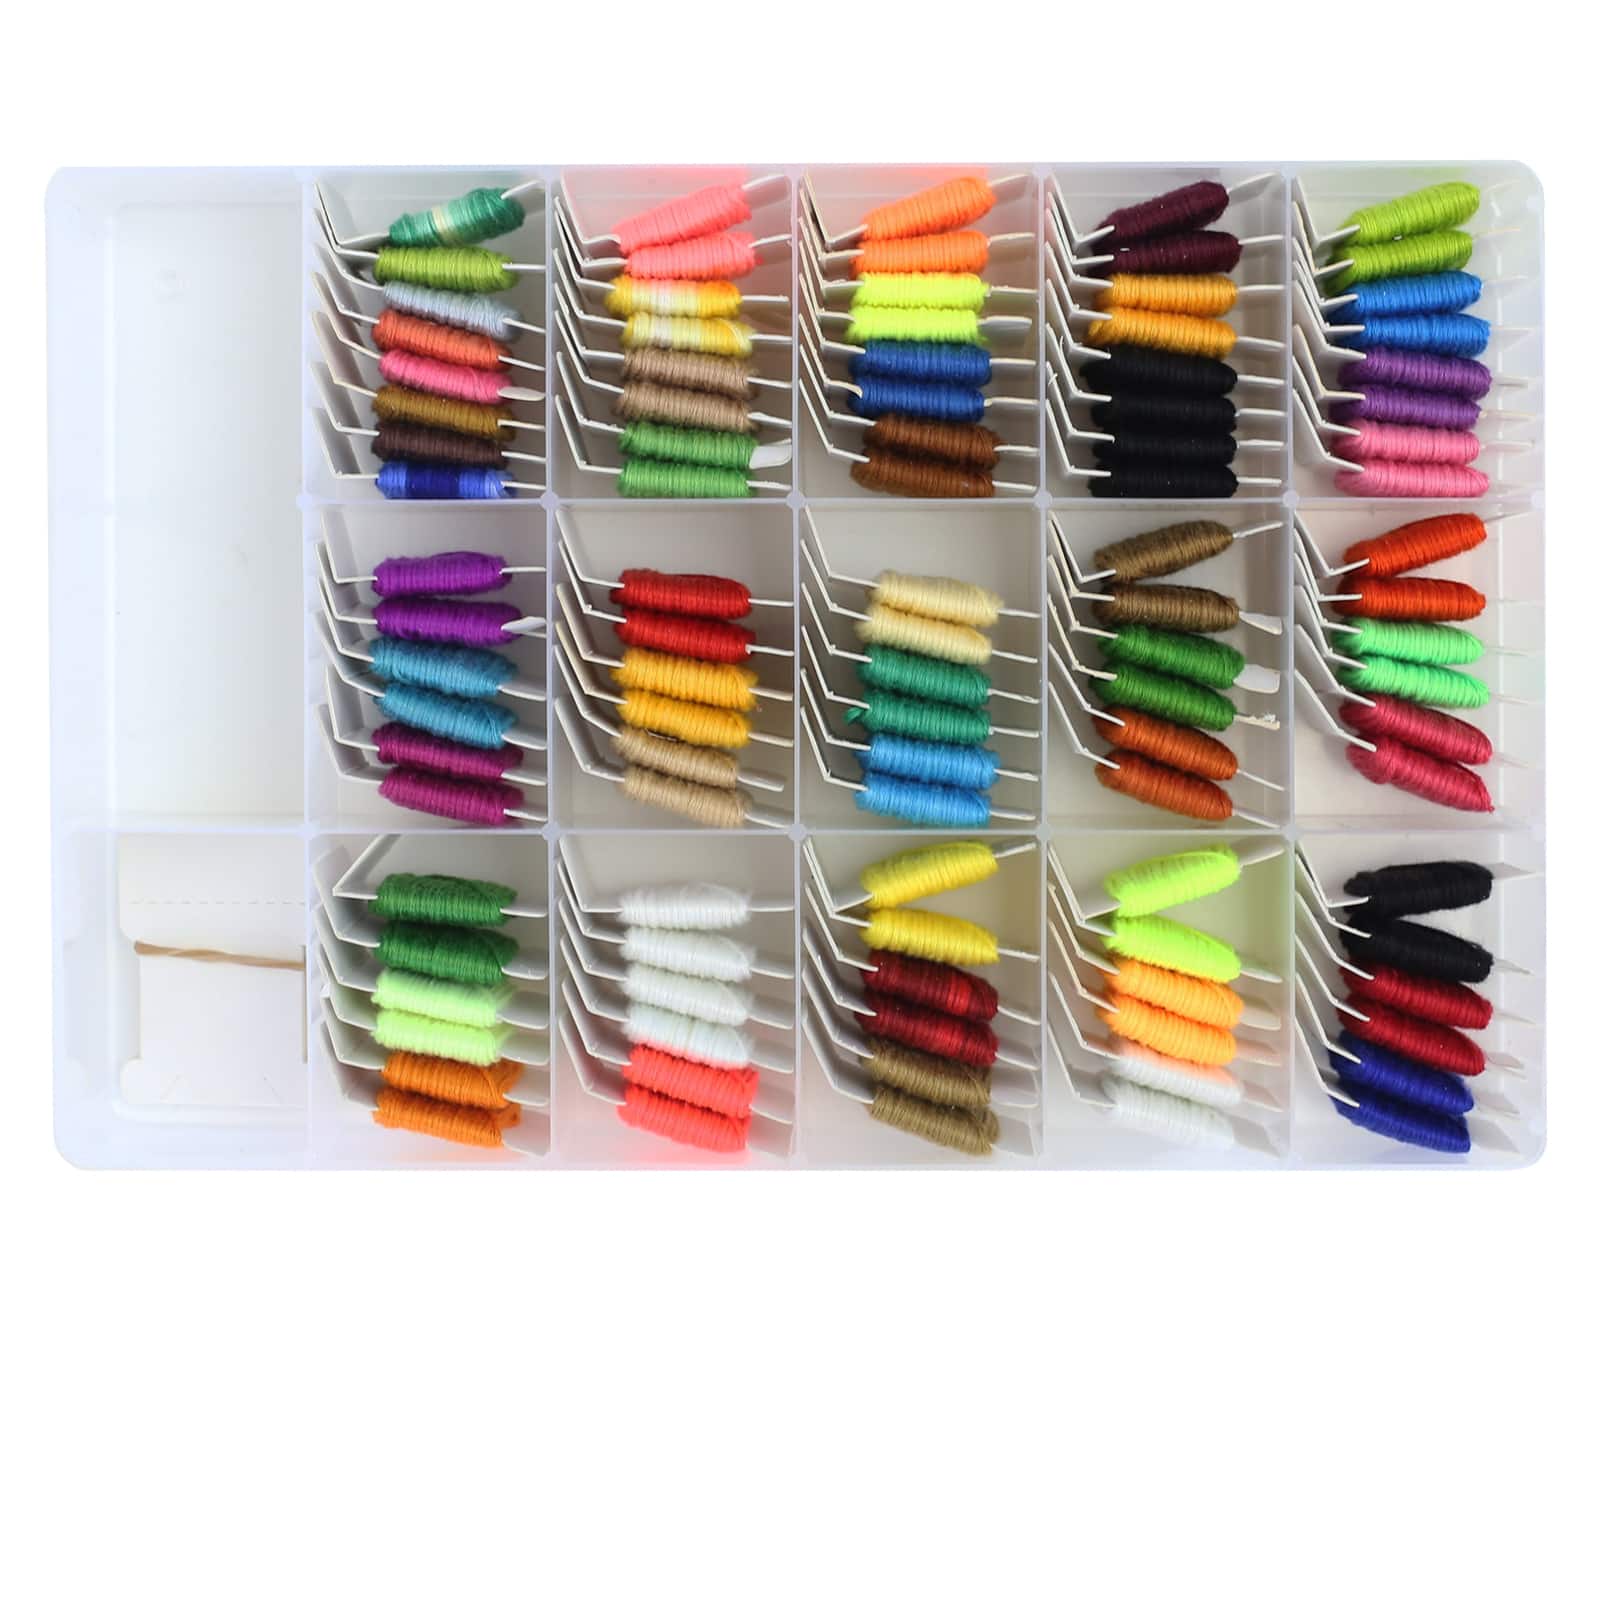 Discount 🔥 Embroidery Floss Organizer Kit By Loops & Threads® 😉